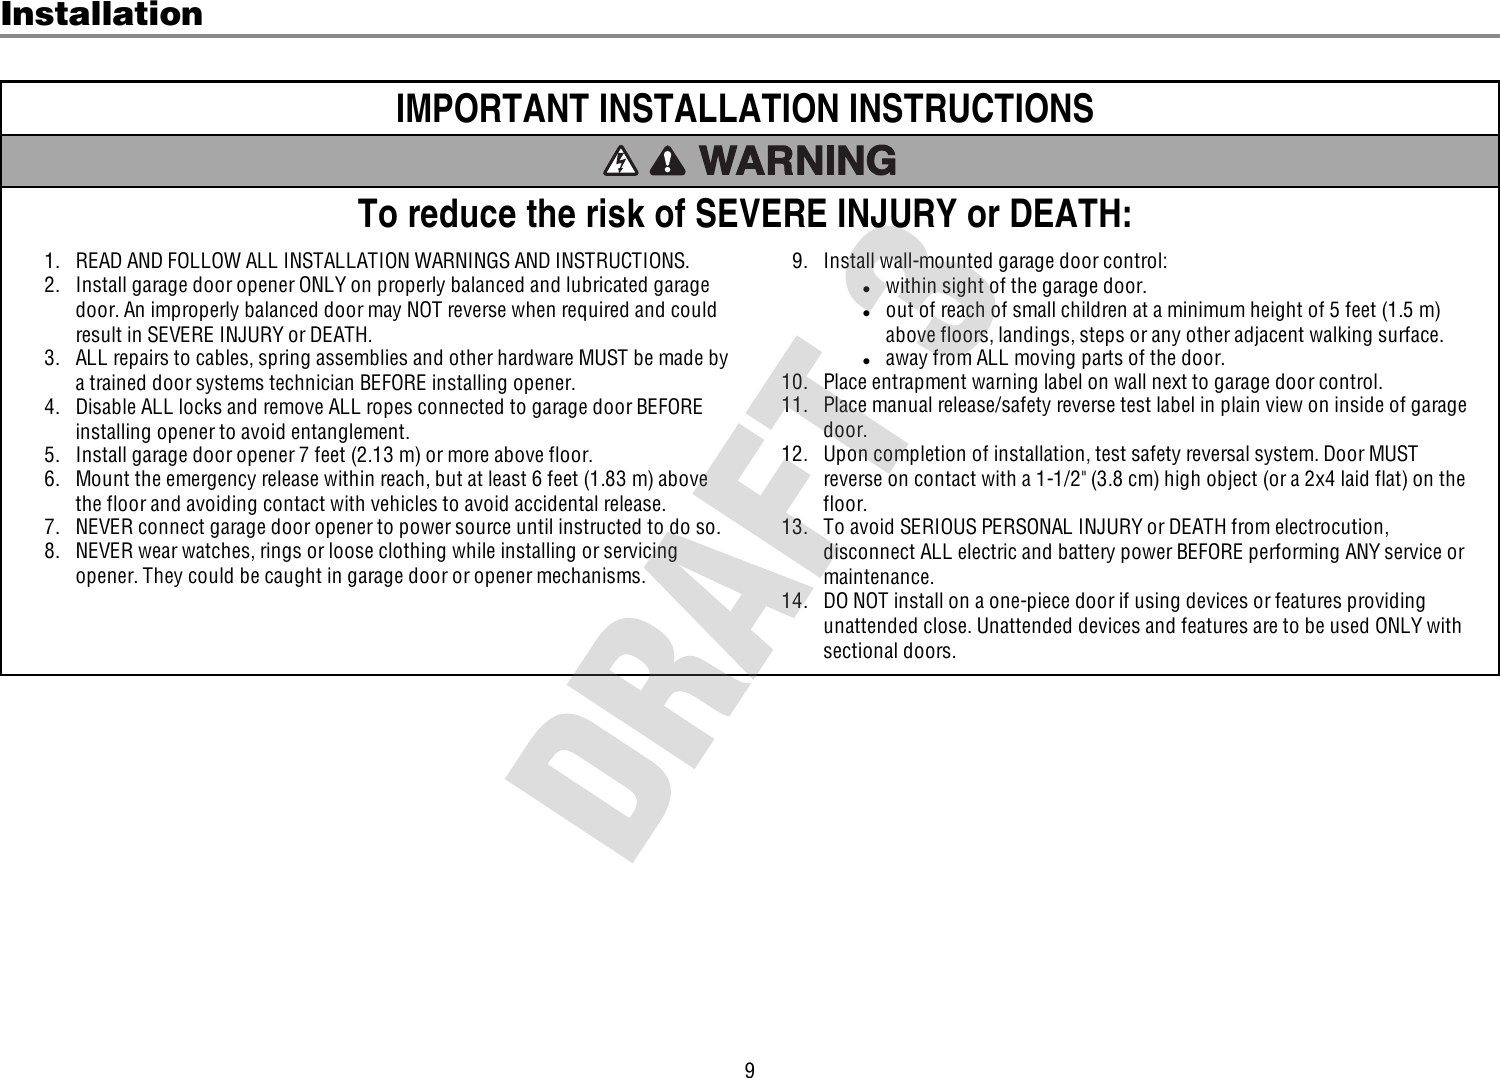 9InstallationIMPORTANT INSTALLATION INSTRUCTIONSTo reduce the risk of SEVERE INJURY or DEATH:1. READ AND FOLLOW ALL INSTALLATION WARNINGS AND INSTRUCTIONS.2. Install garage door opener ONLY on properly balanced and lubricated garagedoor. An improperly balanced door may NOT reverse when required and couldresult in SEVERE INJURY or DEATH.3. ALL repairs to cables, spring assemblies and other hardware MUST be made bya trained door systems technician BEFORE installing opener.4. Disable ALL locks and remove ALL ropes connected to garage door BEFOREinstalling opener to avoid entanglement.5. Install garage door opener 7 feet (2.13 m) or more above floor.6. Mount the emergency release within reach, but at least 6 feet (1.83 m) abovethe floor and avoiding contact with vehicles to avoid accidental release.7. NEVER connect garage door opener to power source until instructed to do so.8. NEVER wear watches, rings or loose clothing while installing or servicingopener. They could be caught in garage door or opener mechanisms.9. Install wall-mounted garage door control:lwithin sight of the garage door.lout of reach of small children at a minimum height of 5feet (1.5m)above floors, landings, steps or any other adjacent walking surface.laway from ALL moving parts of the door.10. Place entrapment warning label on wall next to garage door control.11. Place manual release/safety reverse test label in plain view on inside of garagedoor.12. Upon completion of installation, test safety reversal system. Door MUSTreverse on contact with a 1-1/2&quot; (3.8cm) high object (or a 2x4 laid flat) on thefloor.13. To avoid SERIOUS PERSONAL INJURY or DEATH from electrocution,disconnect ALL electric and battery power BEFORE performing ANY service ormaintenance.14. DO NOT install on a one-piece door if using devices or features providingunattended close. Unattended devices and features are to be used ONLY withsectional doors.